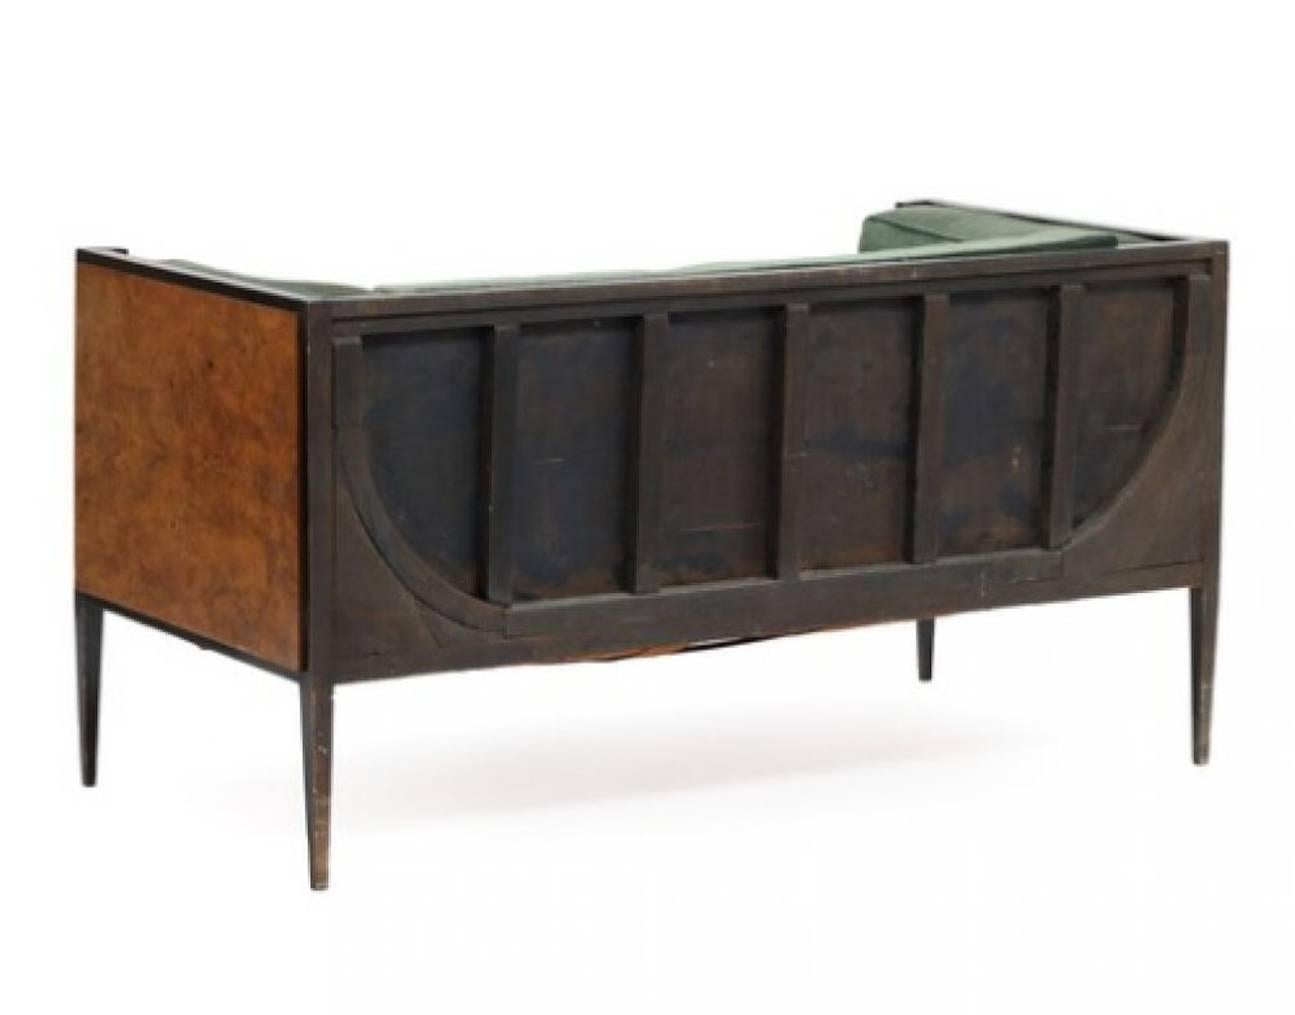 Danish cabinetmaker: Two-seat root wood and black lacquered wooden Art Deco sofa, upholstered with green velour. 1930s. L. 155 cm.

Condition :
Wear due to age and use. Marks and scratches. Upholstery with stains 